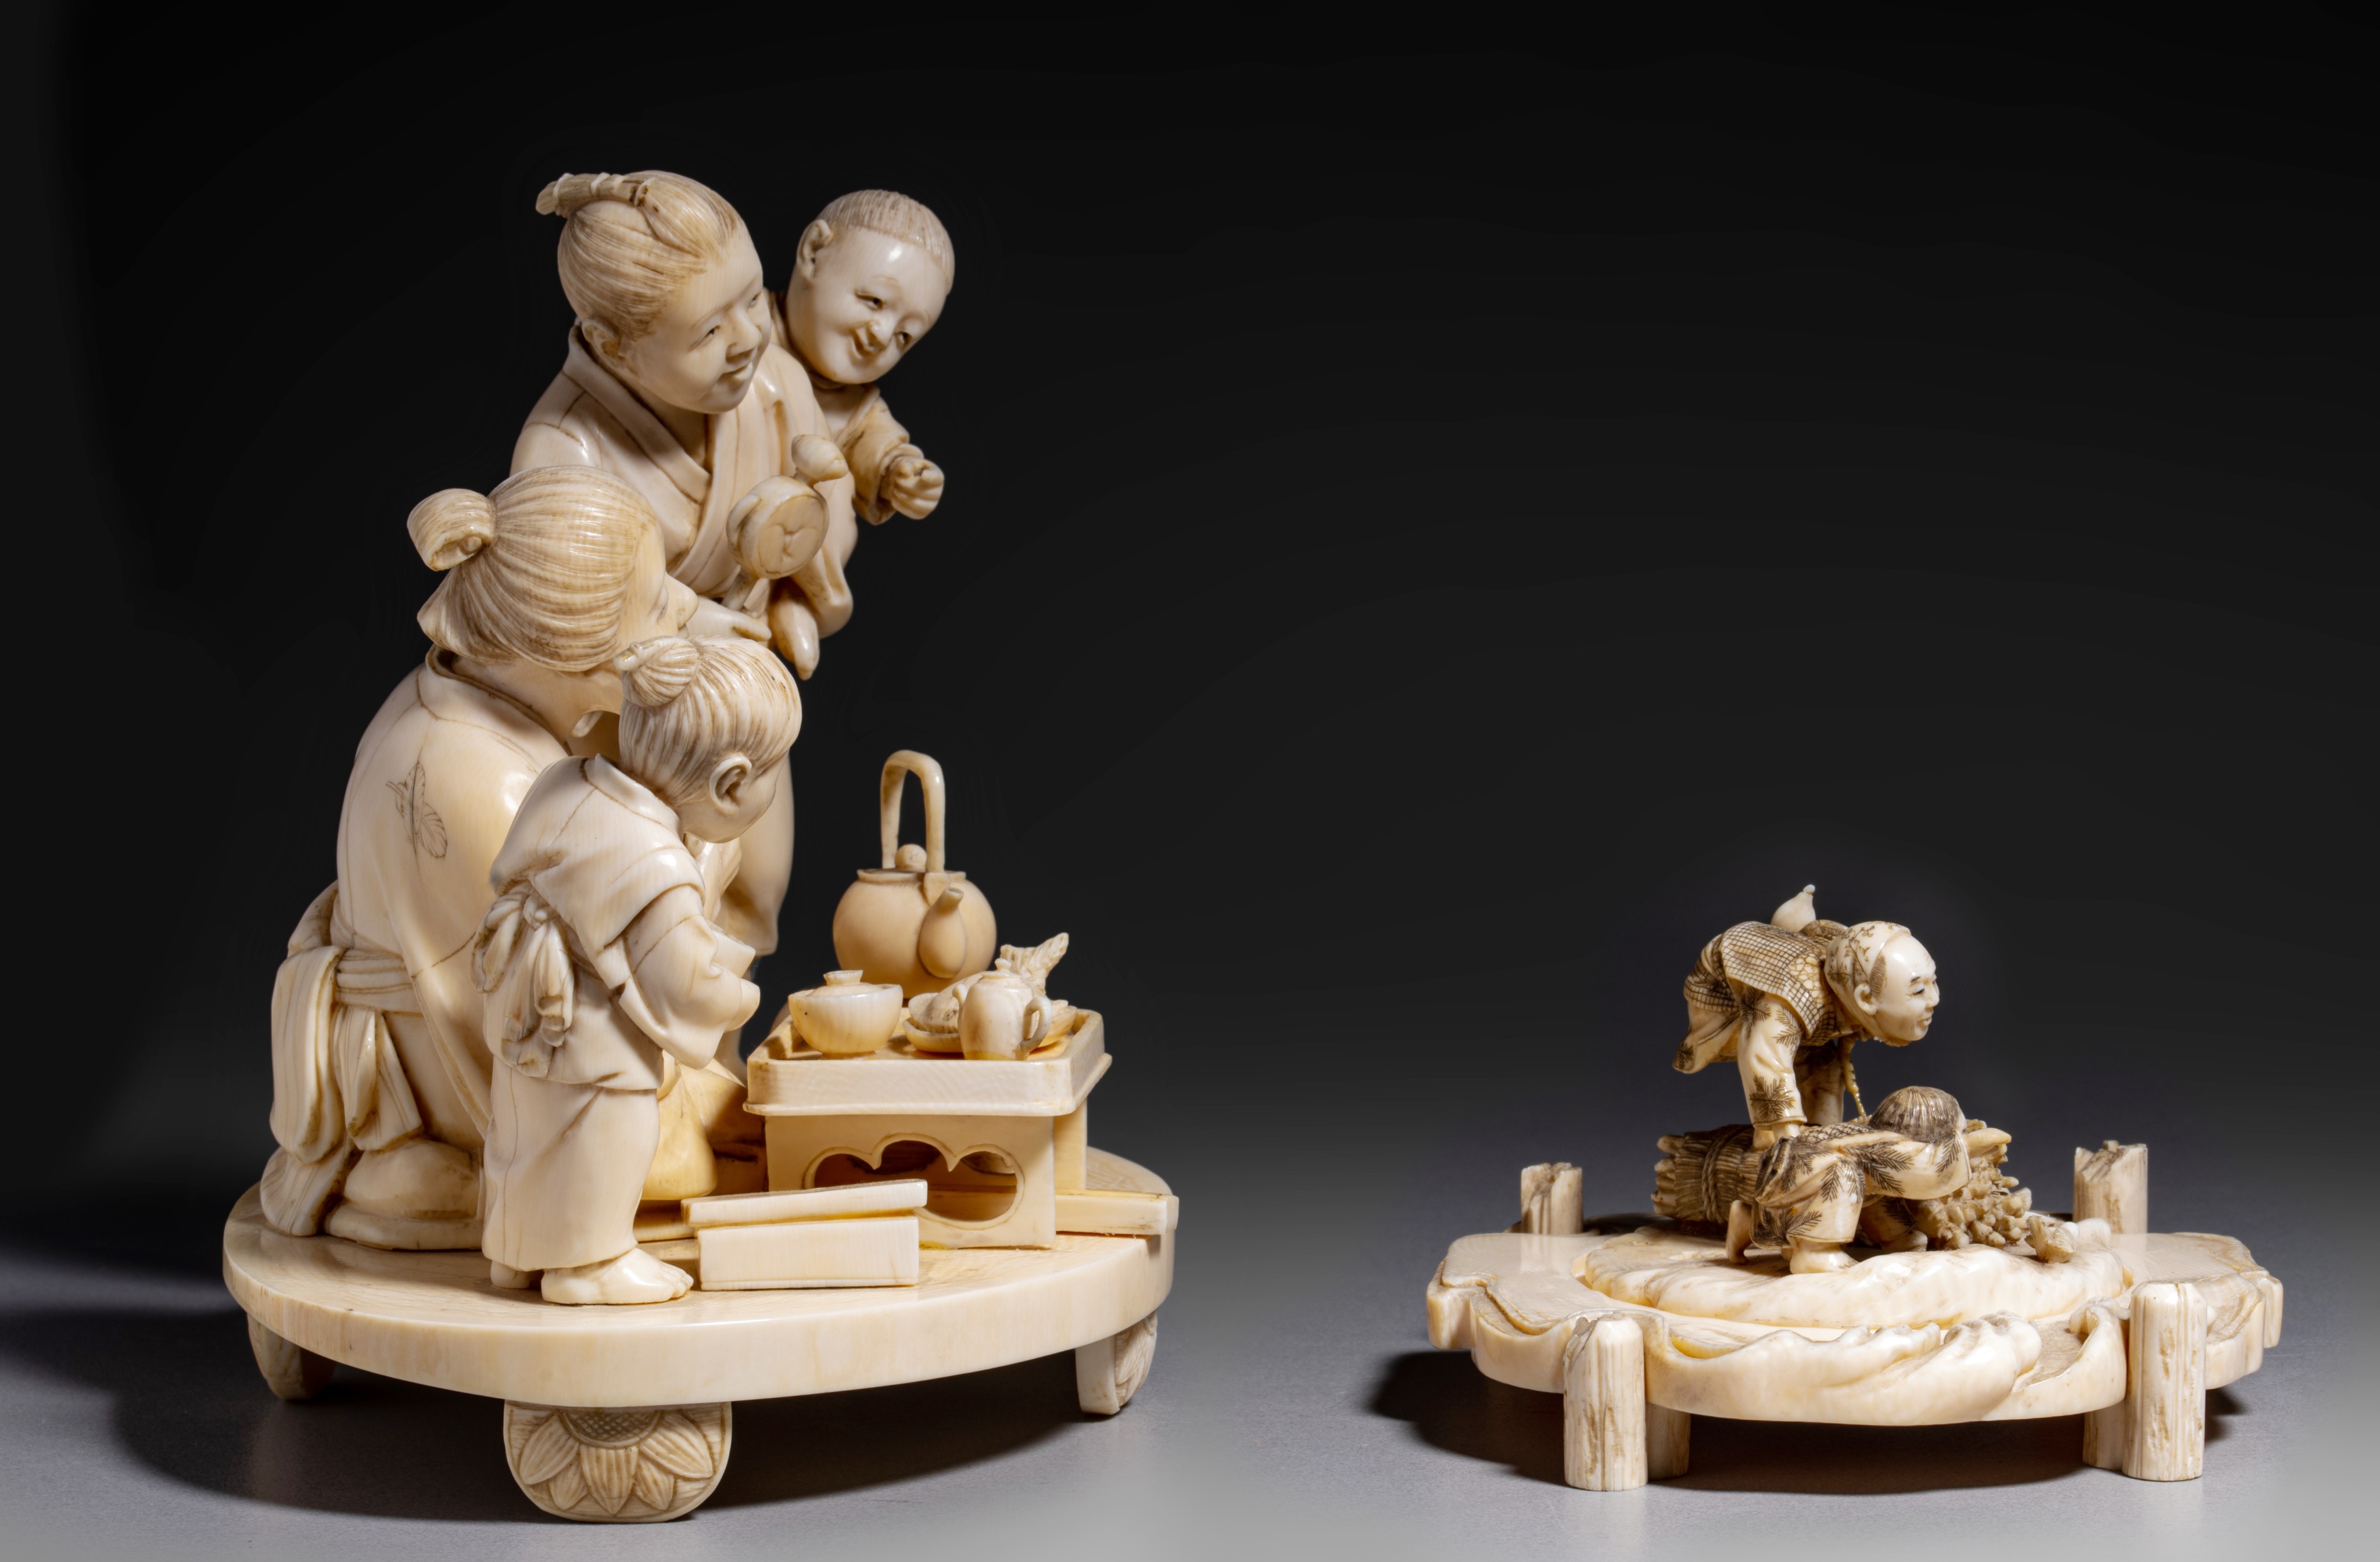 Two Japanese ivory animated scenes, H 12,4 cm - H 5,2 cm, 451g - 118g (+) - Image 4 of 7